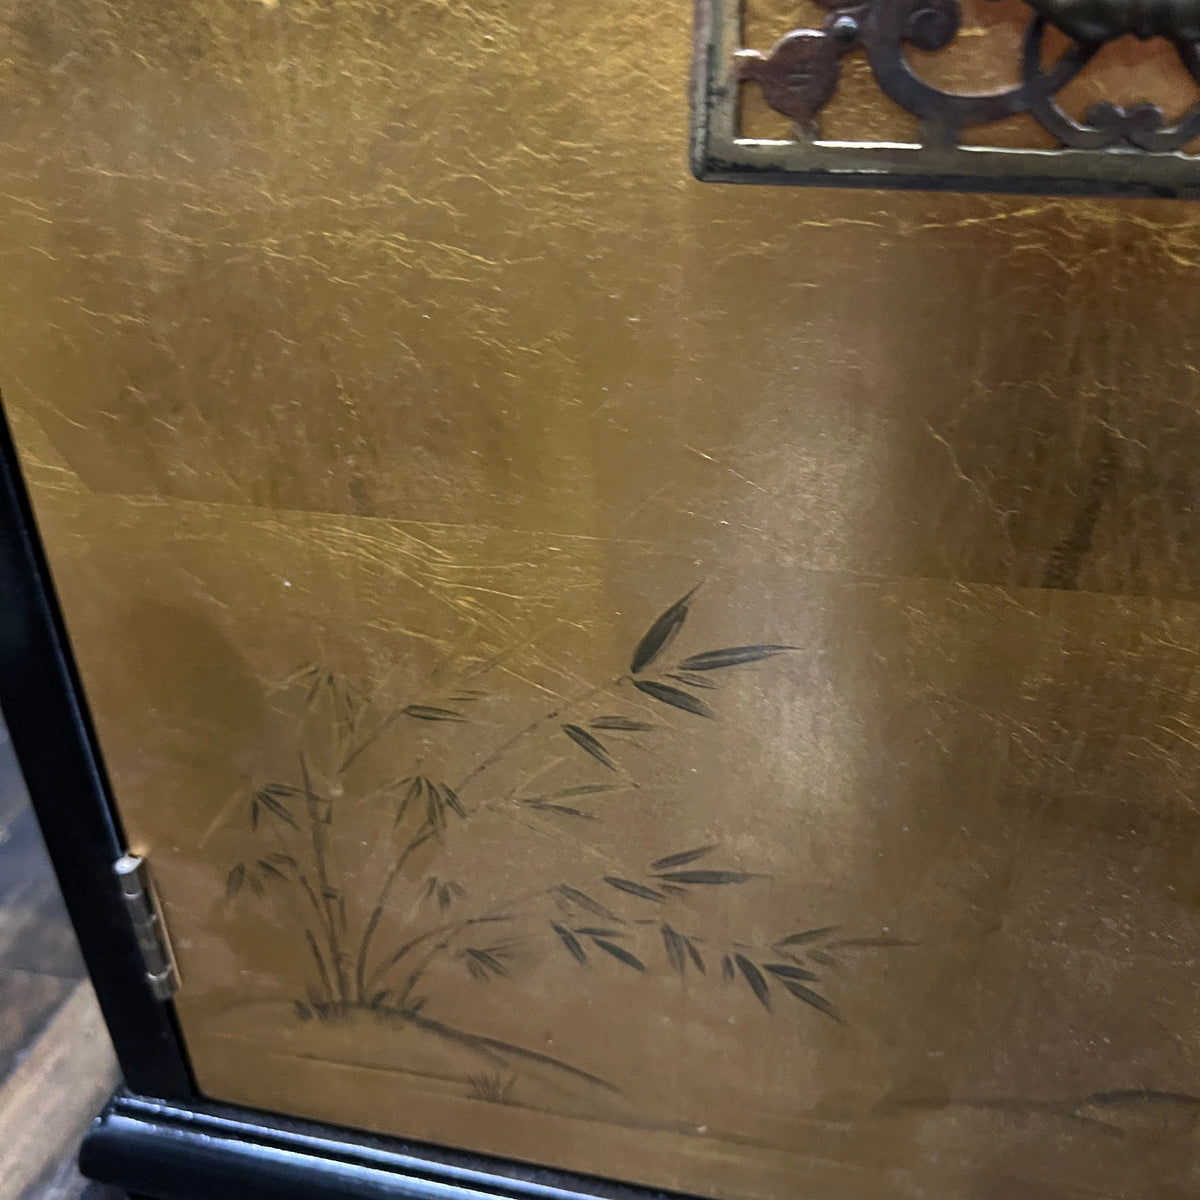 Chinoiserie style black lacquer cabinet with gilded (golden) doors that have images of birds, mountains and grasses painted in the gilding.  